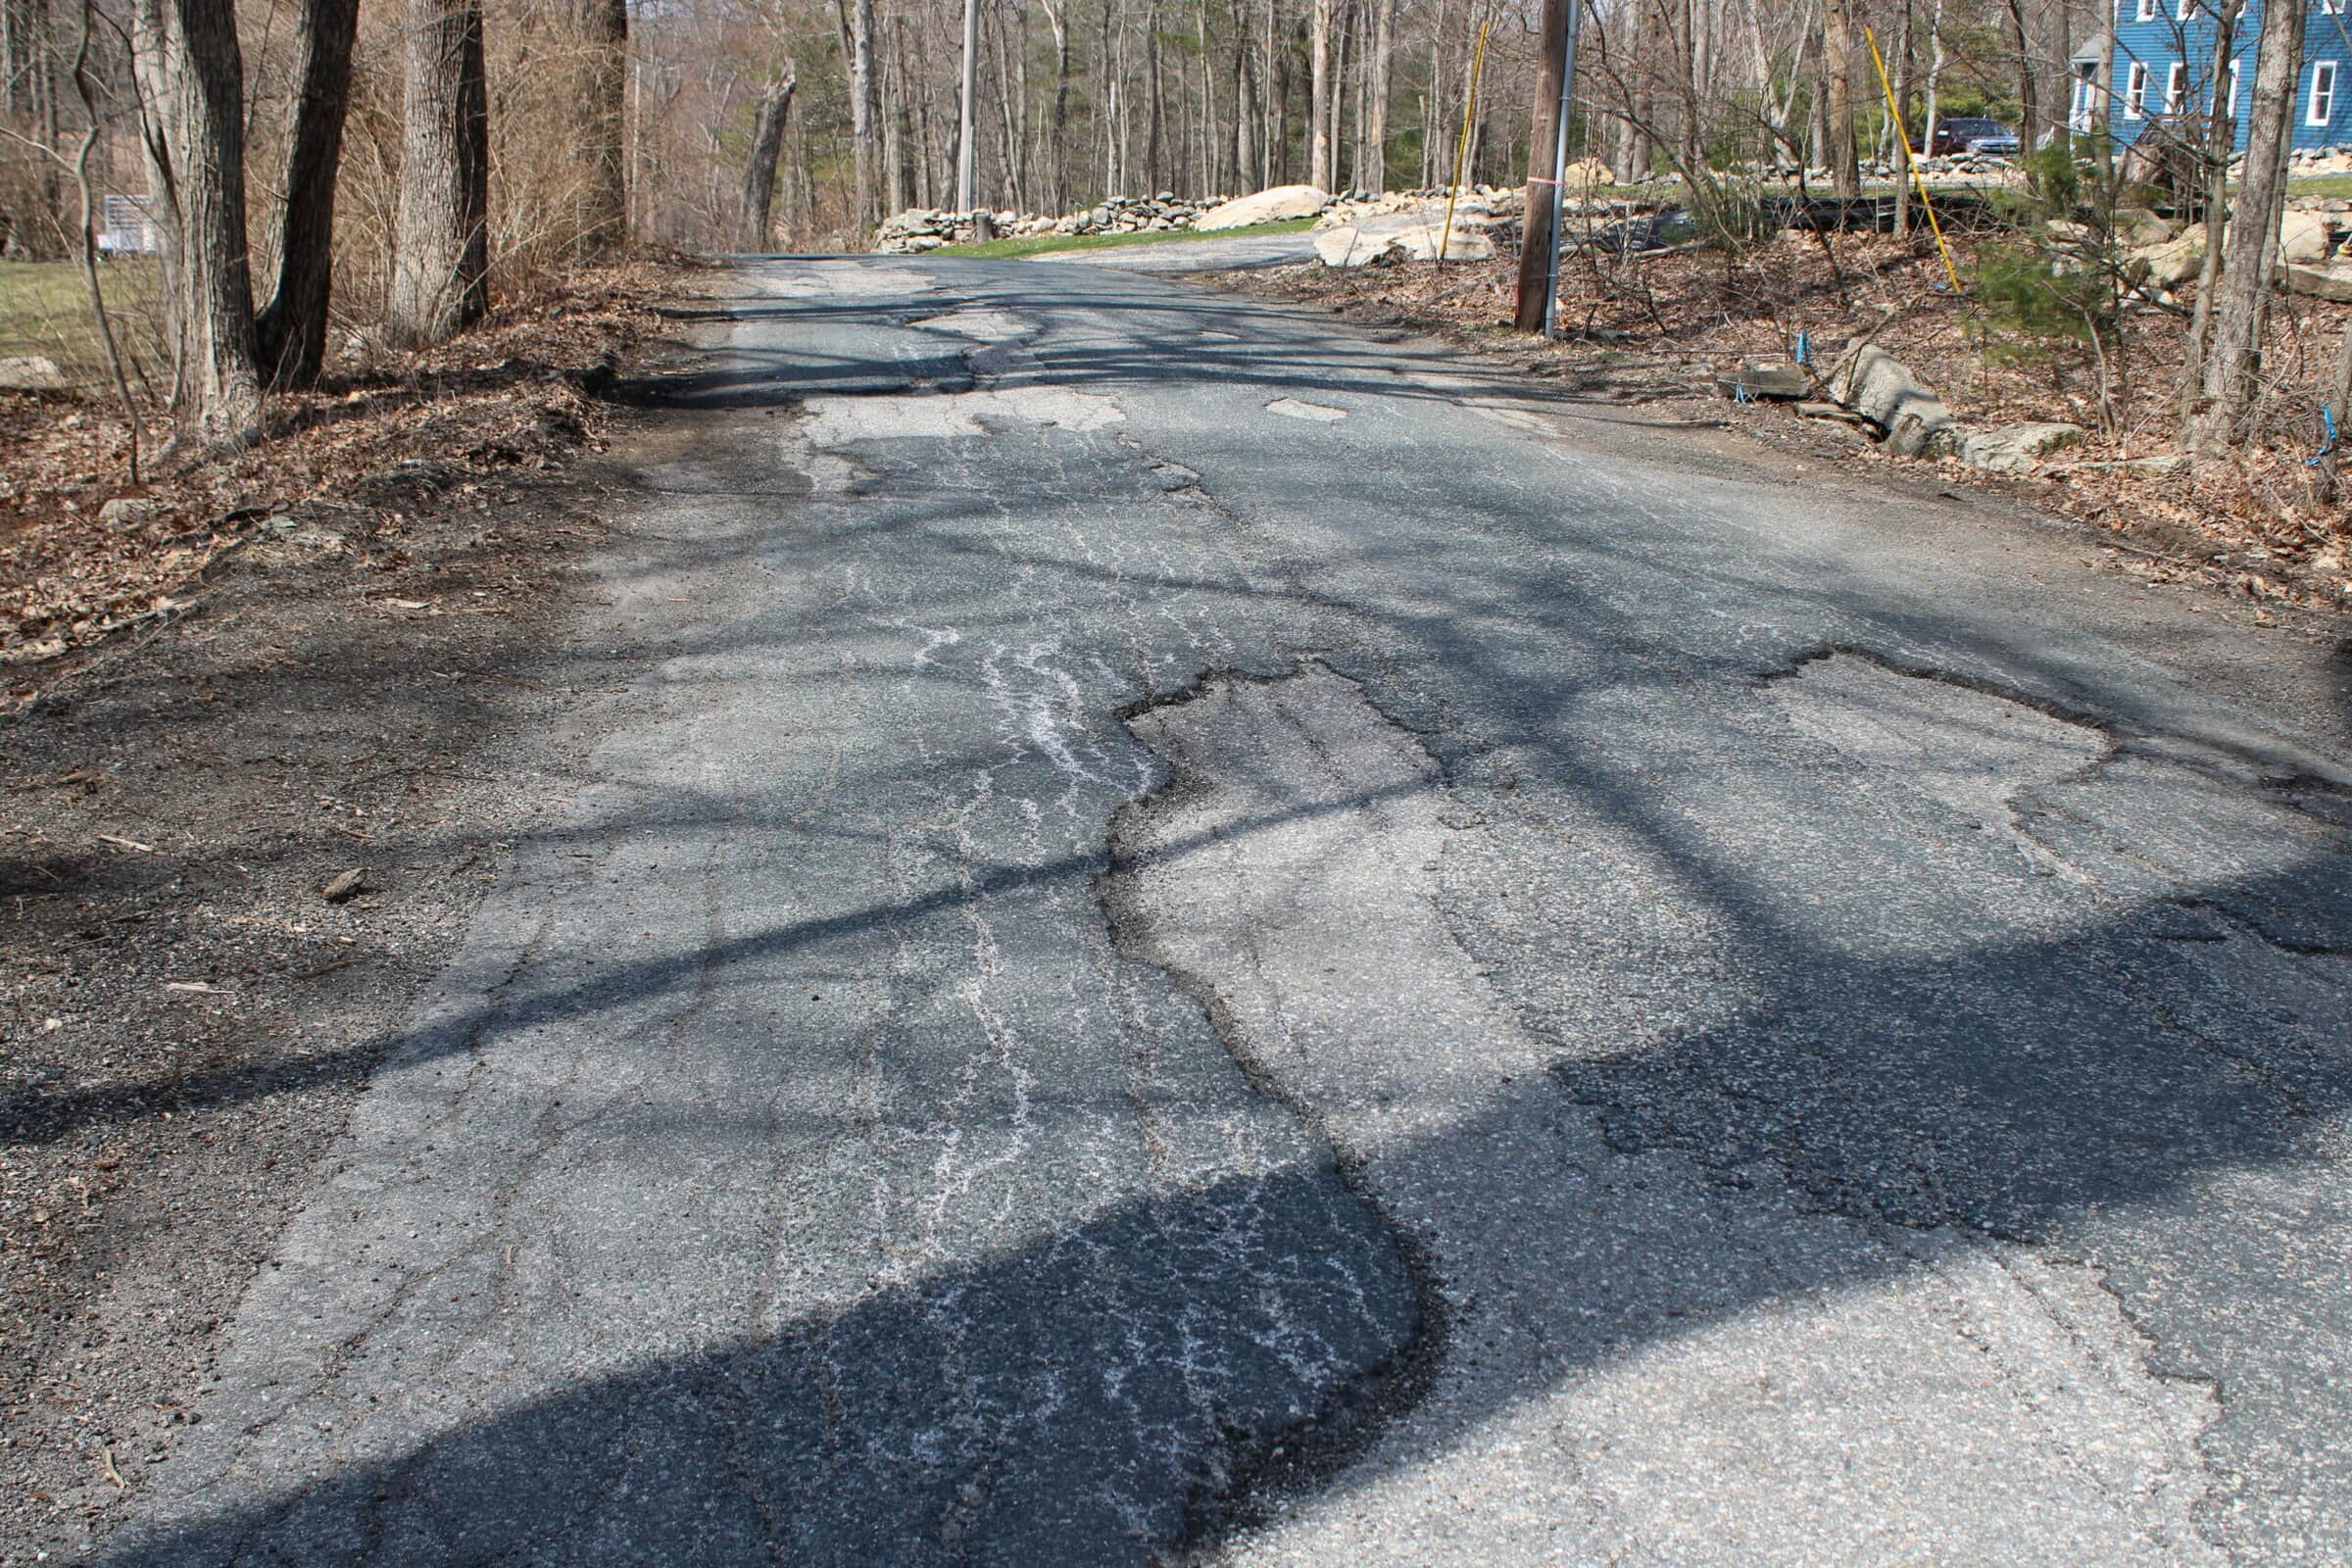 Reconstructing George Hill Road could cost $7 million